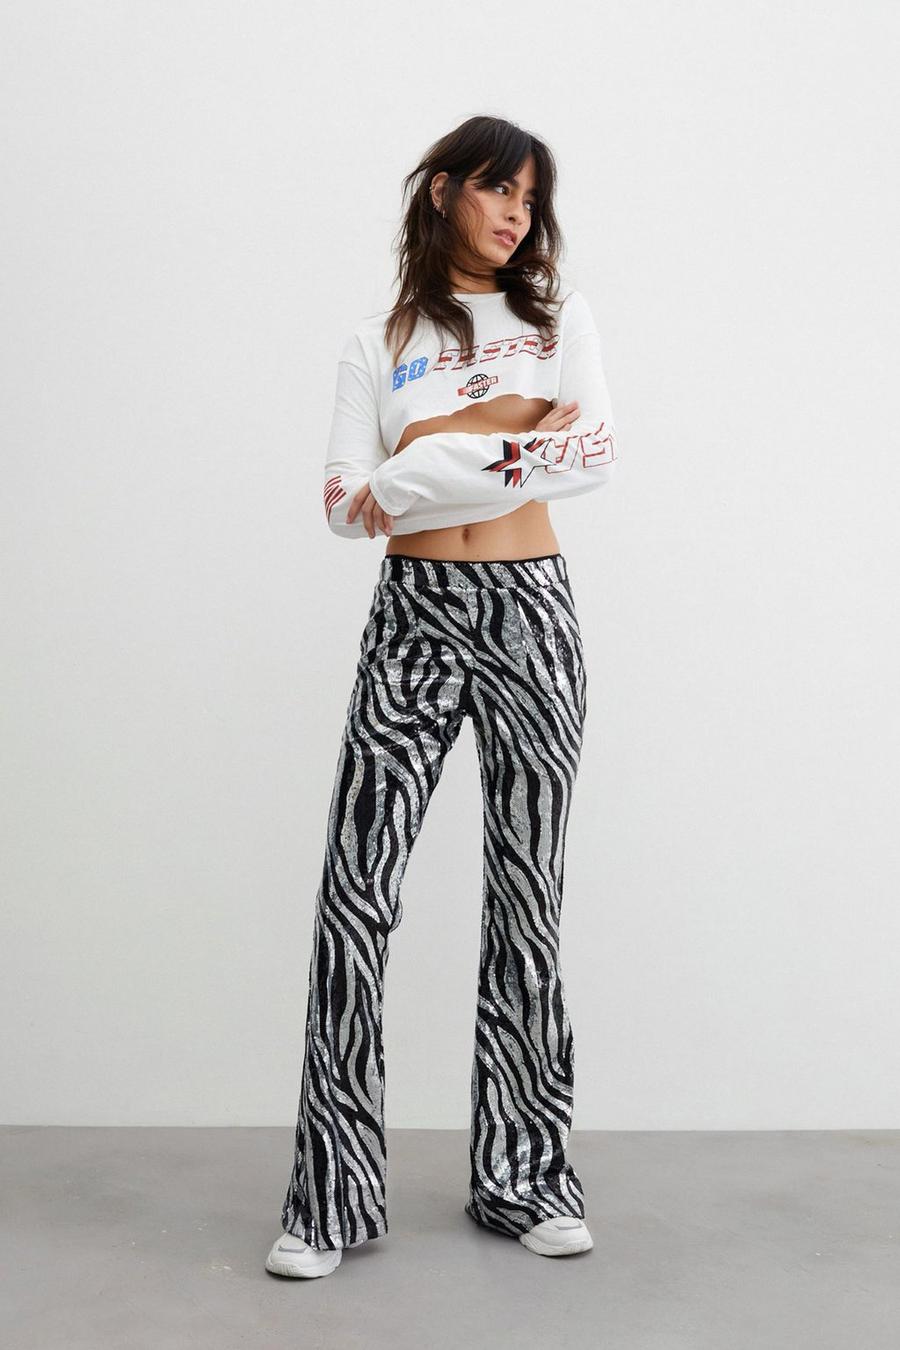 Sequin Fit and Flared Zebra Print Trousers